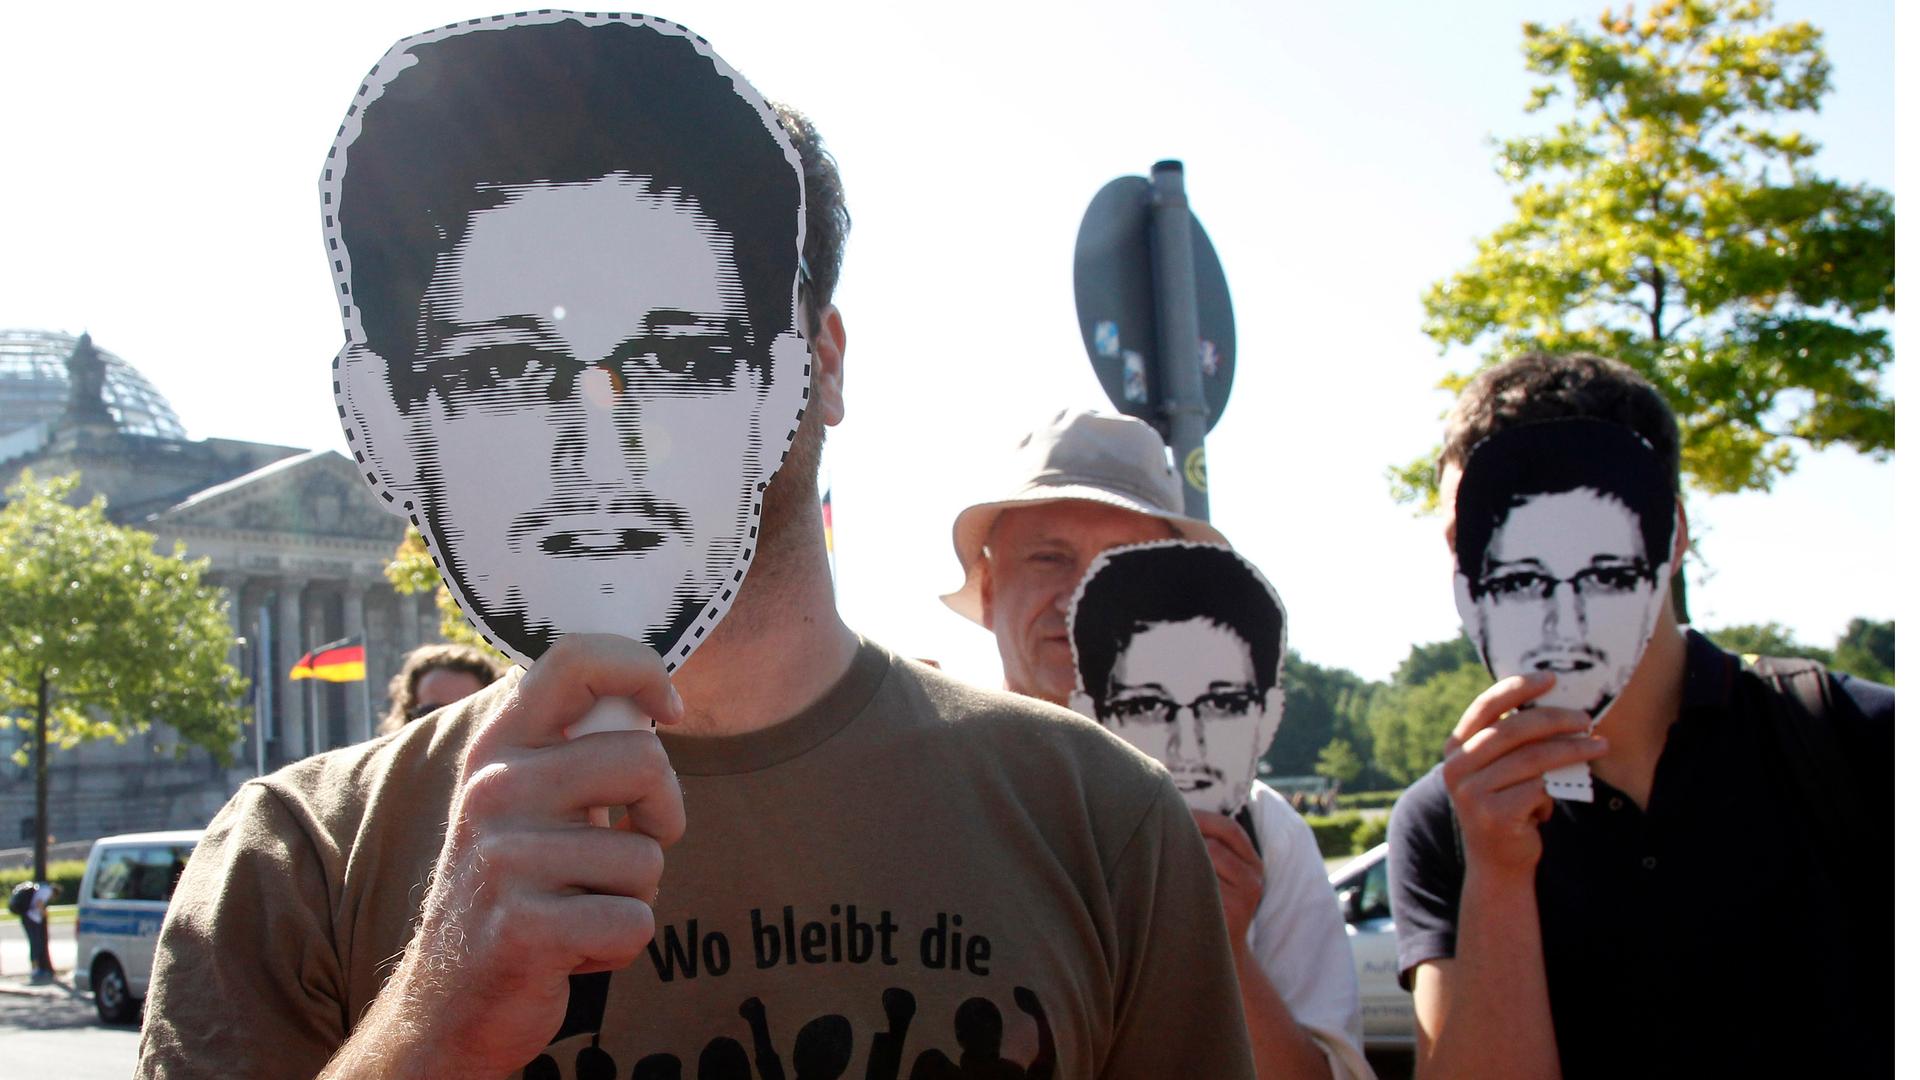 Protesters hold masks depicting former US National Security Agency contractor Edward Snowden during a demonstration in Berlin on May 22, 2014. The sentence on the shirt reads, "What has happened to revolution?"